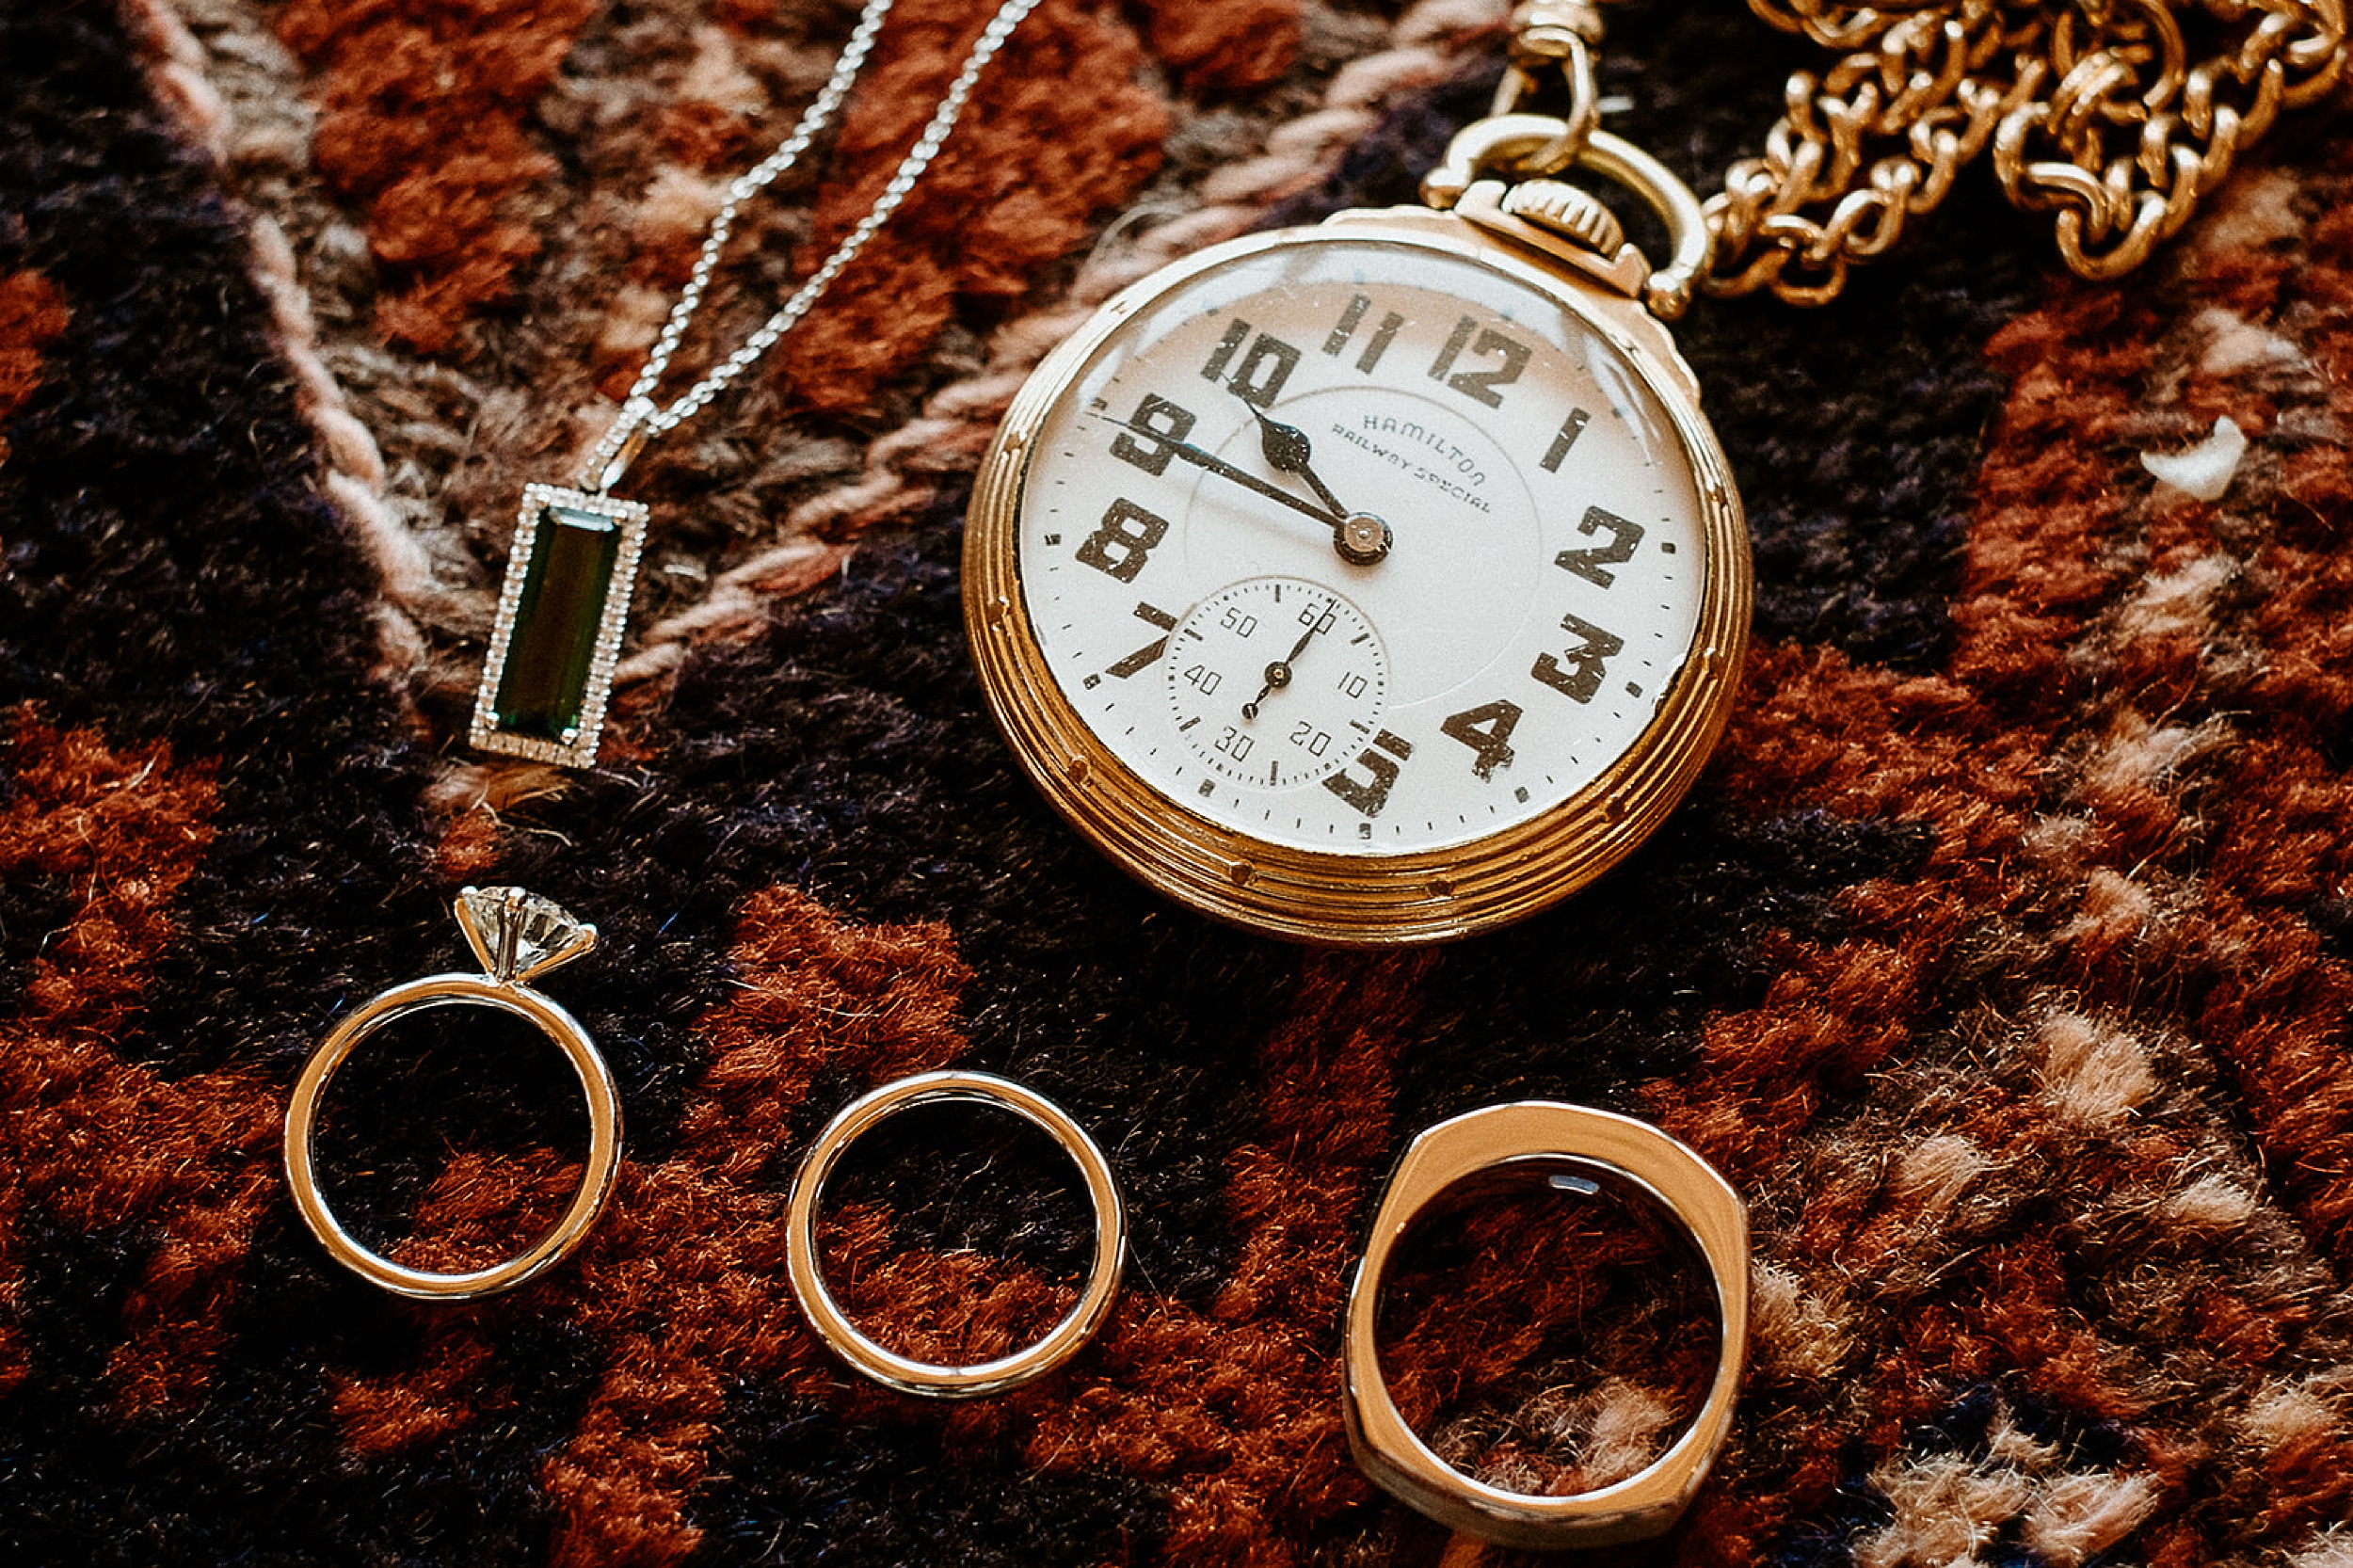 groom's pocket watch and rings